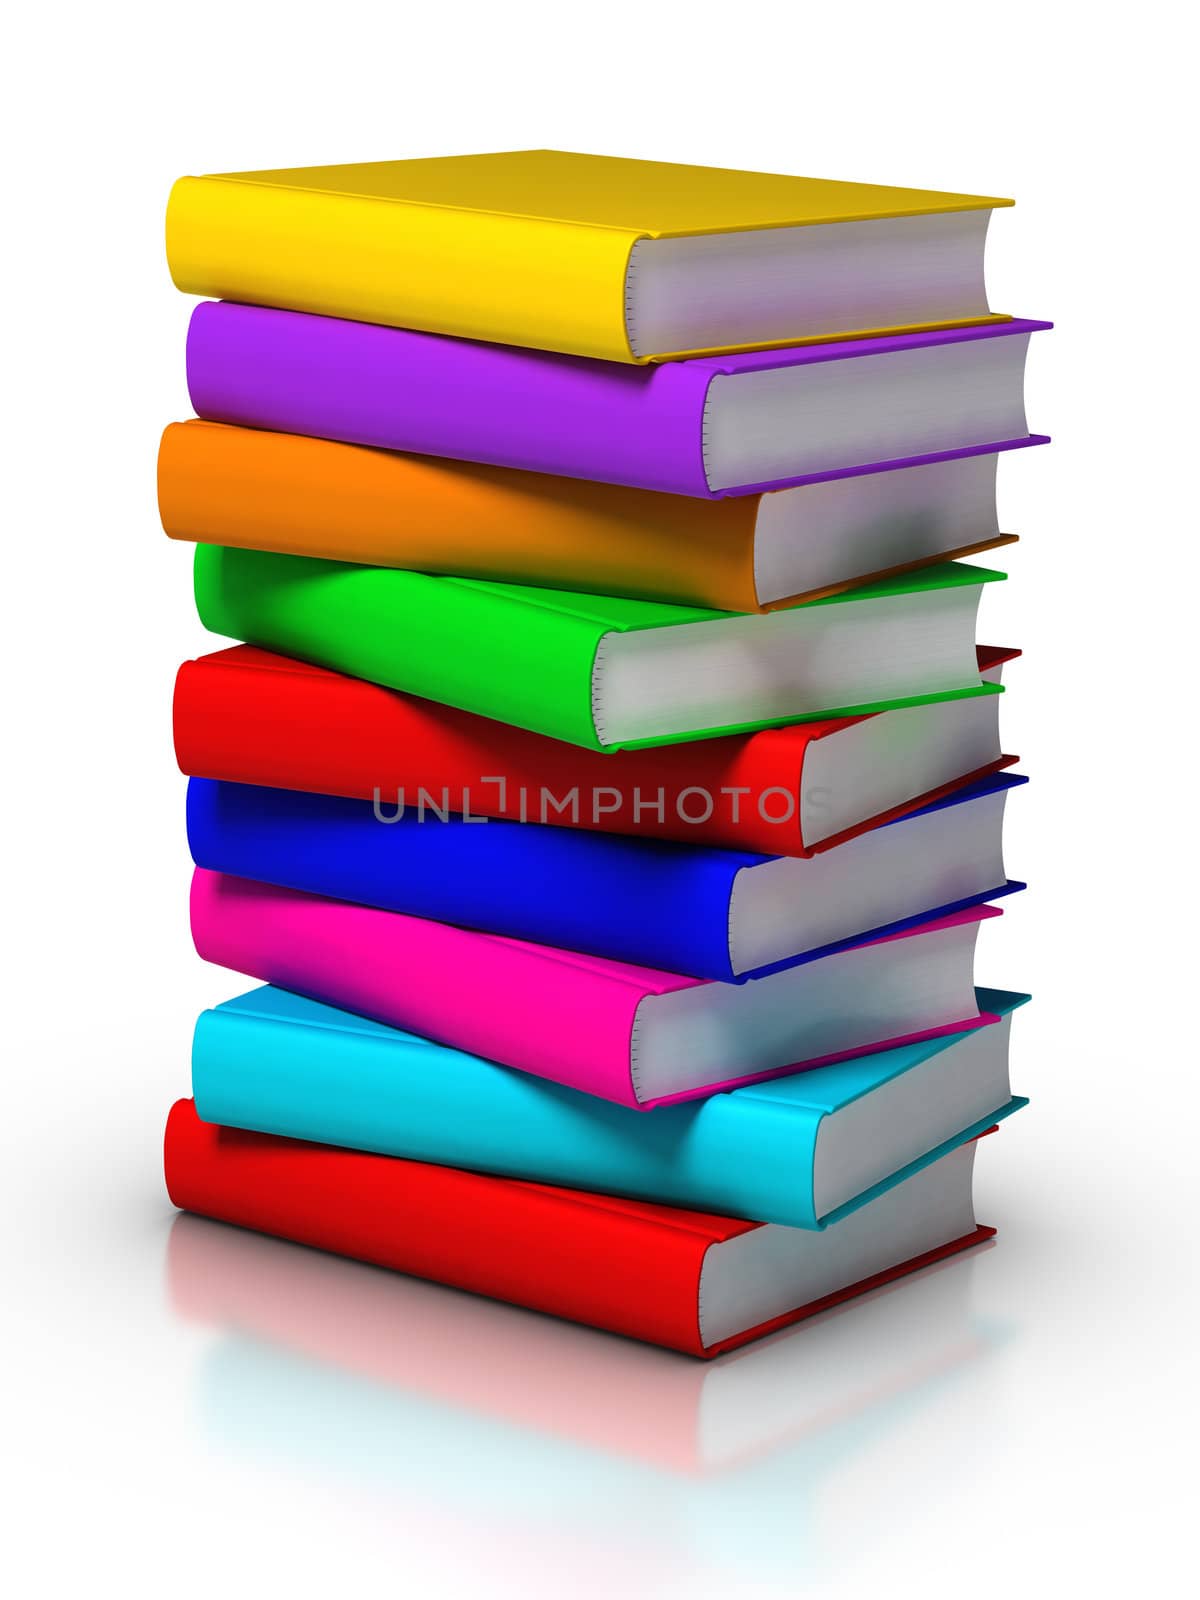 3D rendered stack of colourful books